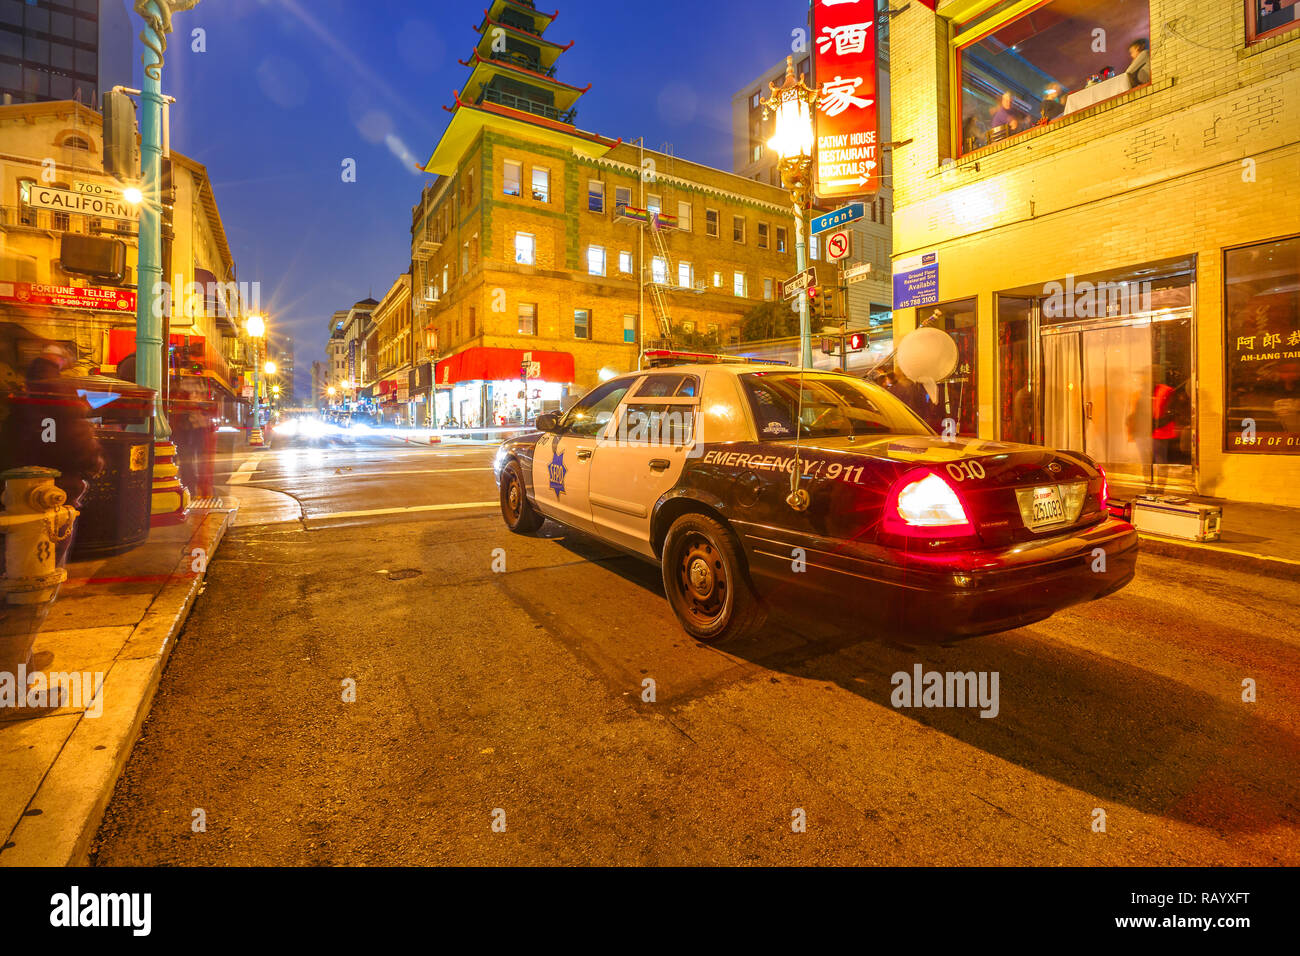 San Francisco, California, United States - August 16, 2016: police car on a street in Chinatown of San Francisco by night. Urban street view. Blue hour shot. Stock Photo